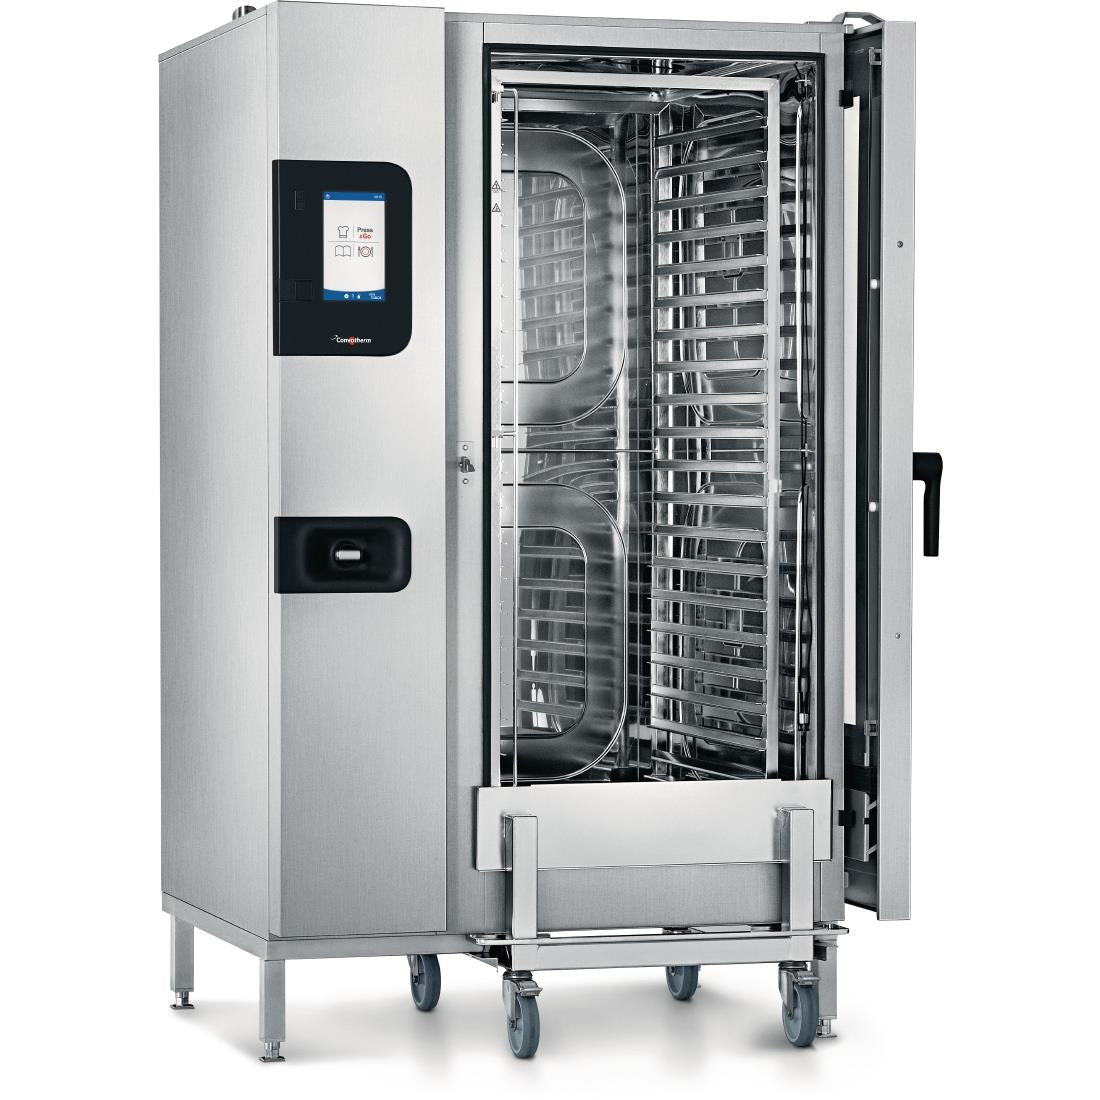 HC260-MO Convotherm 4 easyTouch Combi Oven 20 x 2 x1 GN Grid with ConvoGrill JD Catering Equipment Solutions Ltd